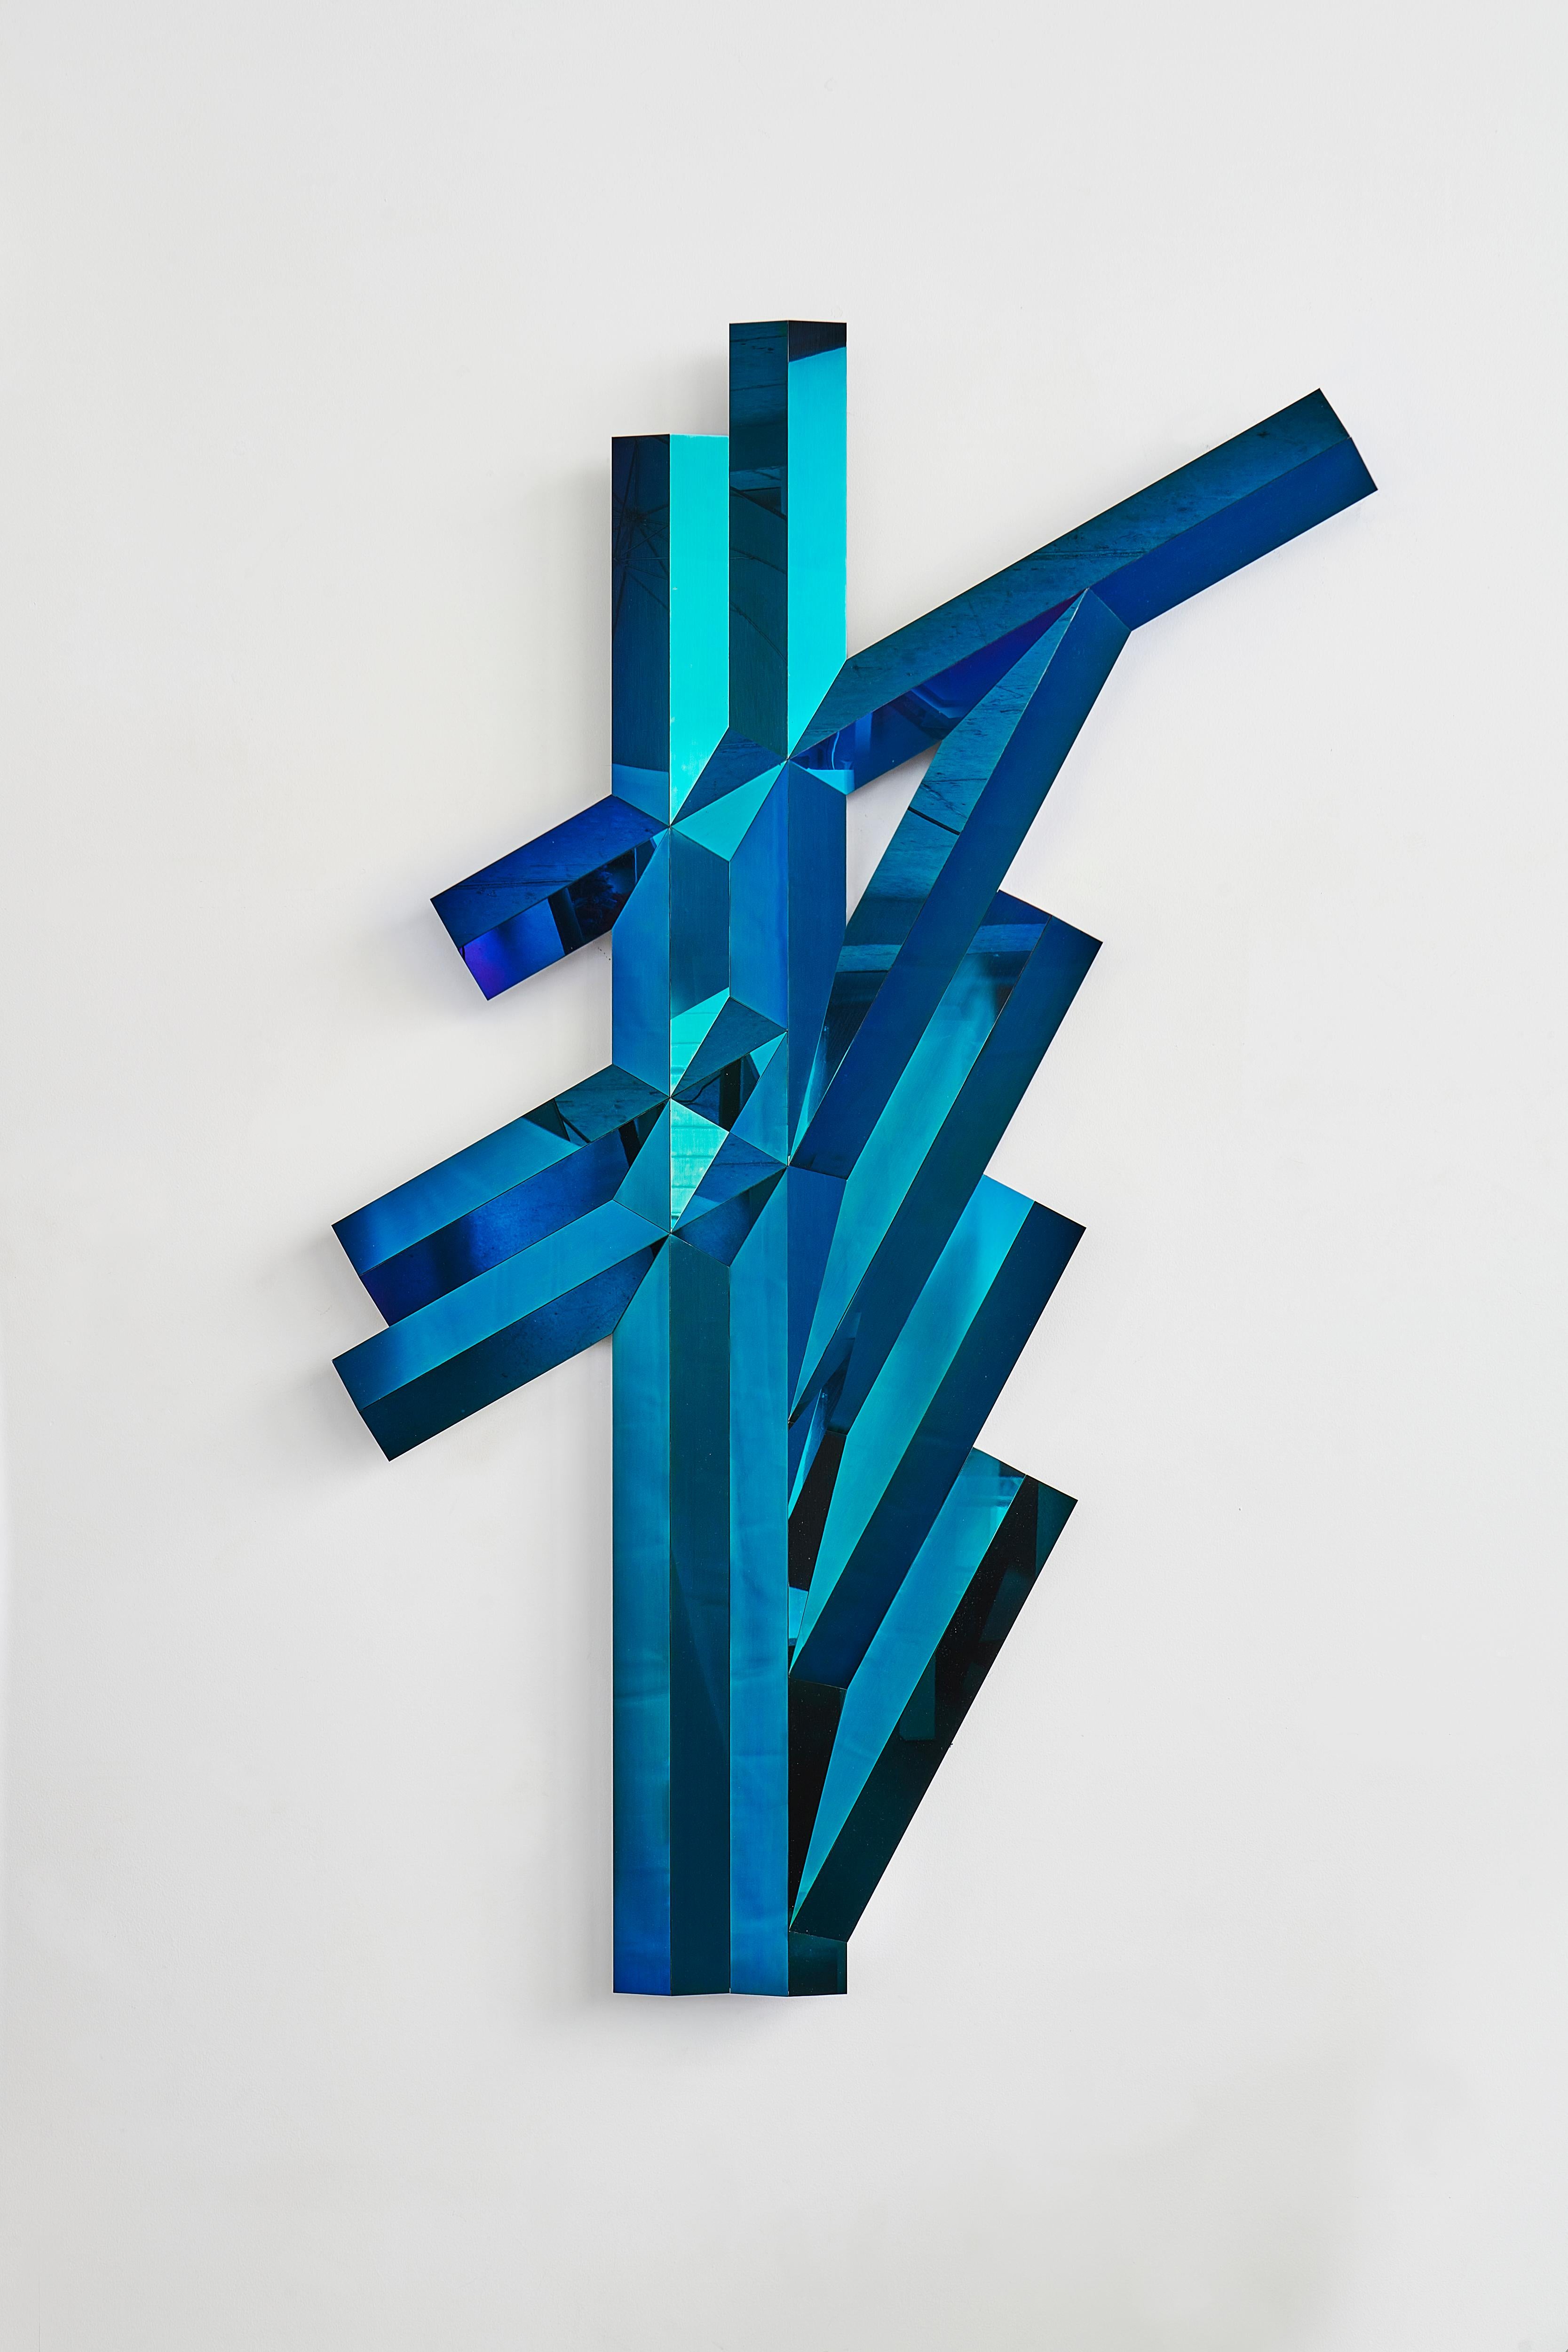 Galactica I Blue Mirror Sculpture by SB26
Dimensions: W 92 x D 10 x H 148 cm
Materials: Stainless Steel, Blue Finishing.

Galactica is a visual vocabulary, inspired by both retro-futurism and architecture, developed by Samuel. Wall sculptures and